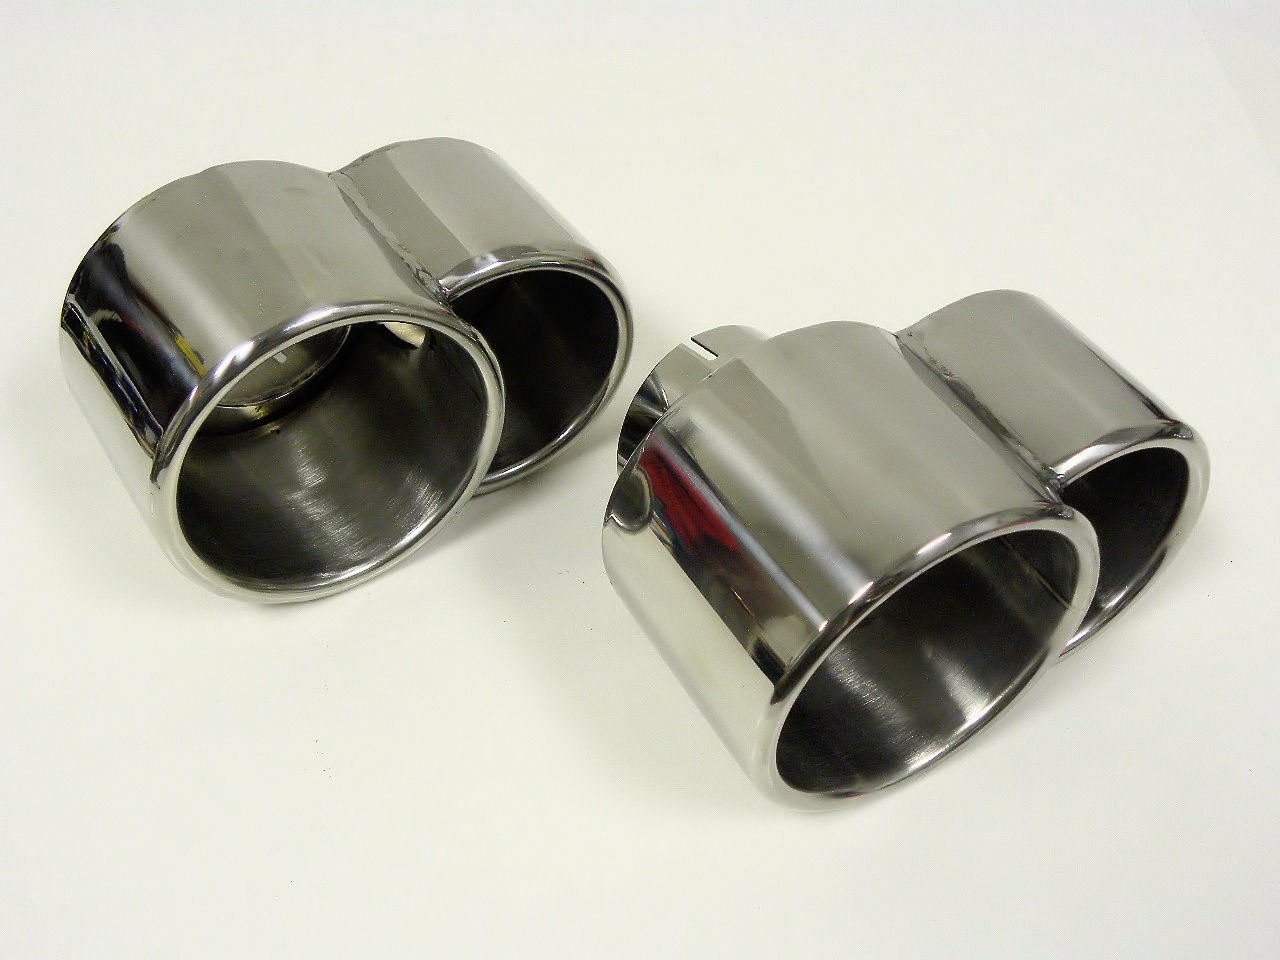 QTY 2 PORSCHE 996 911 STYLE UNIVERSAL DUAL STAINLESS STEEL EXHAUST TIPS PAIR 